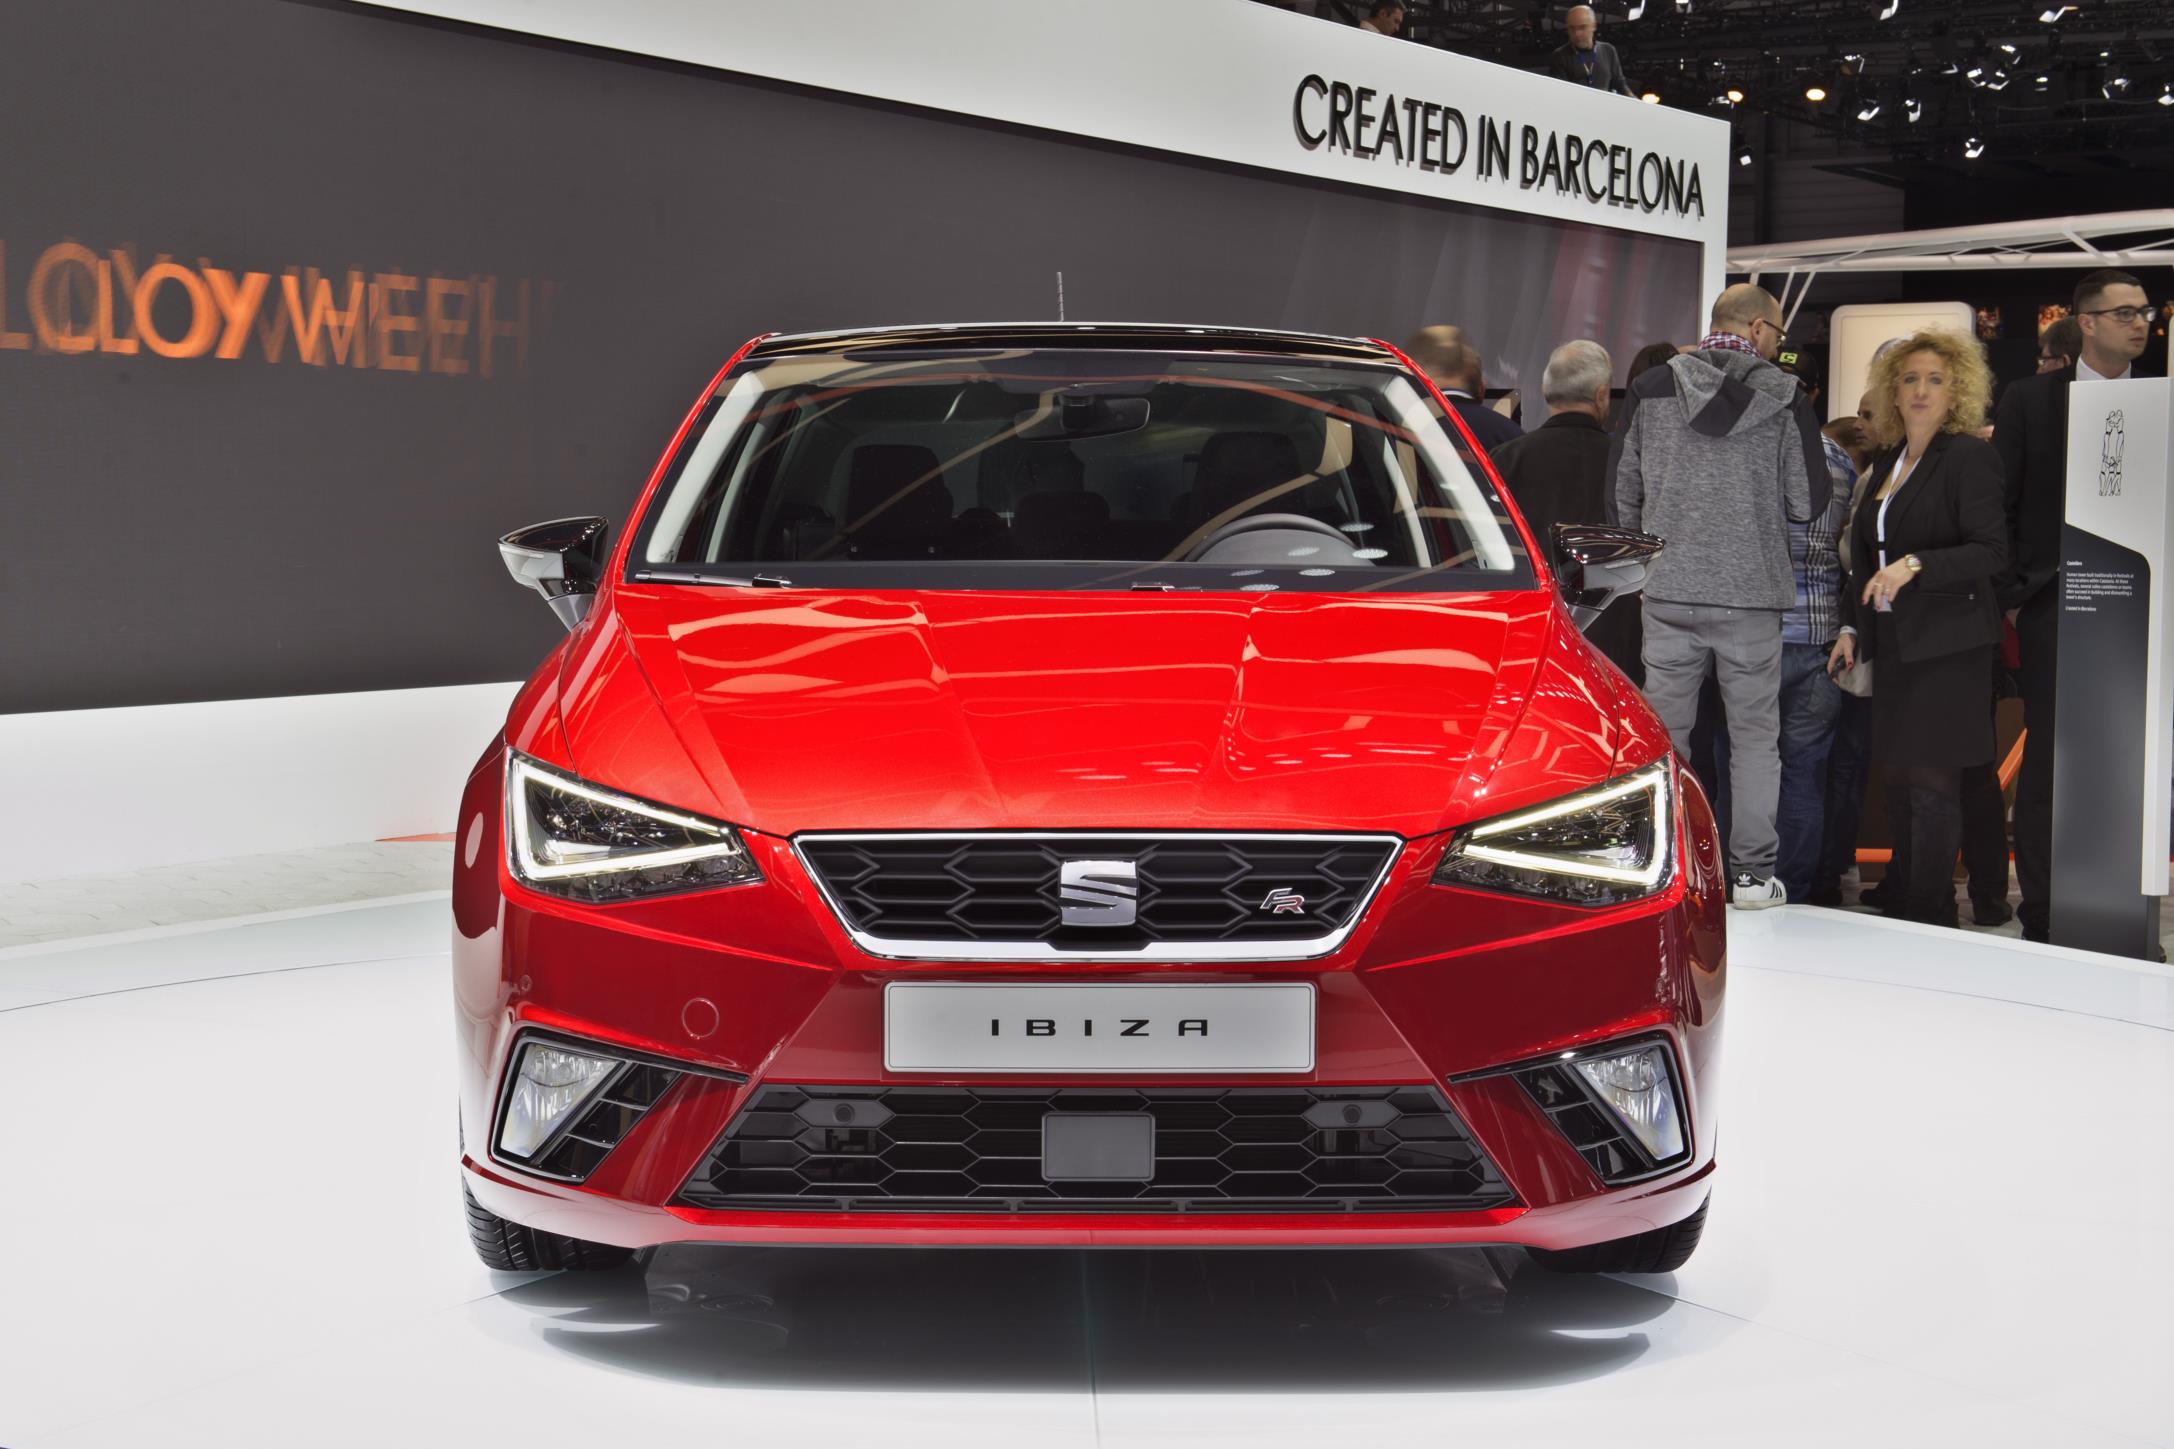 Seat Ibiza is affected by the 2018 seatbelt alert